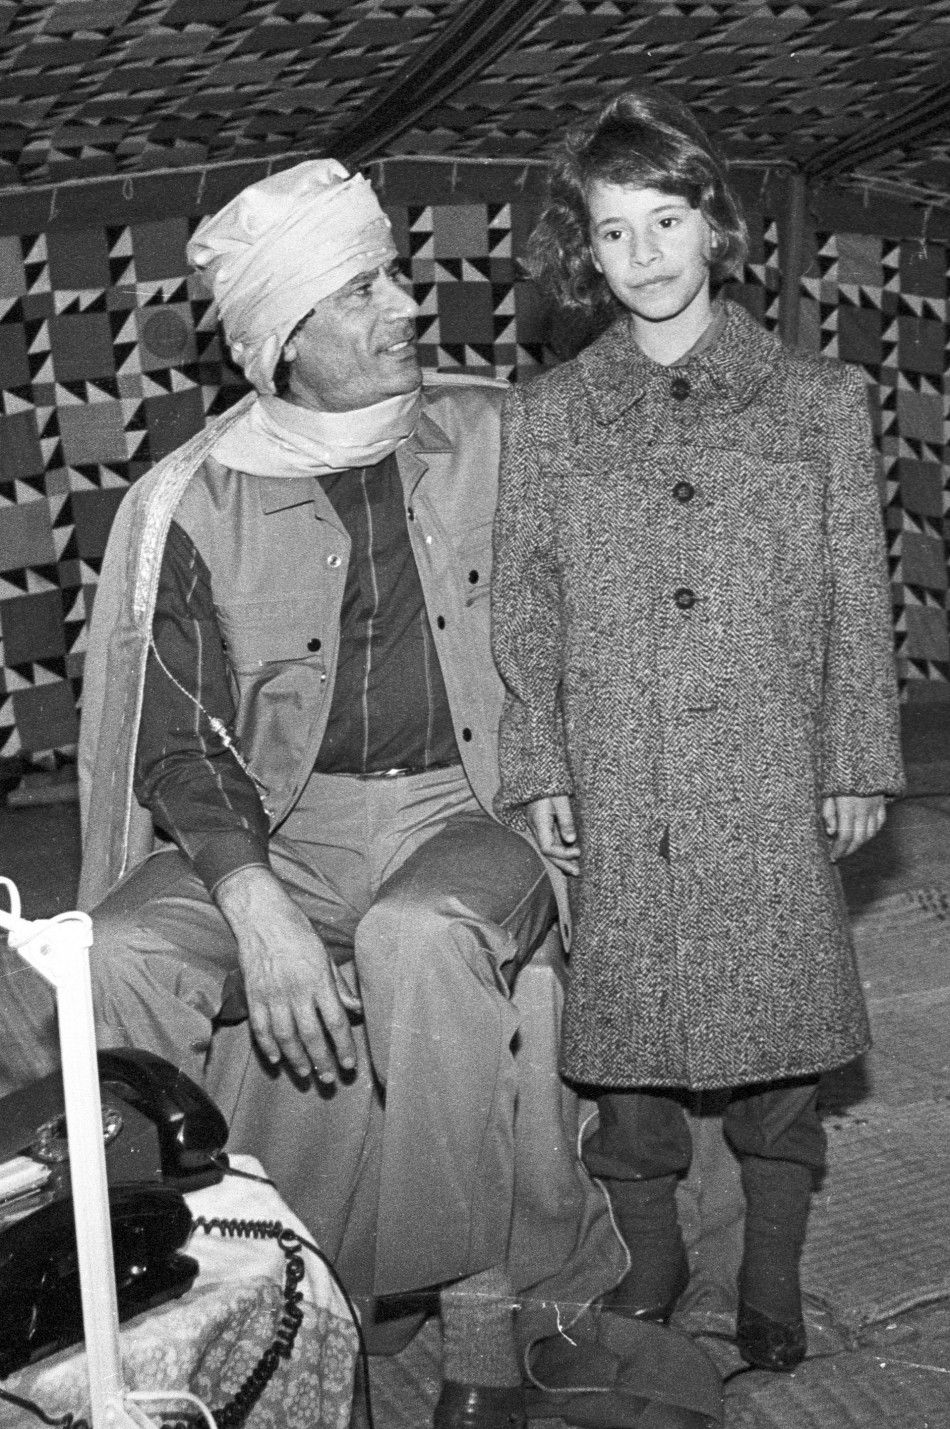 Muammar Gaddafi with his daughter Aysha in his Bedouin tent January 12, 1986.